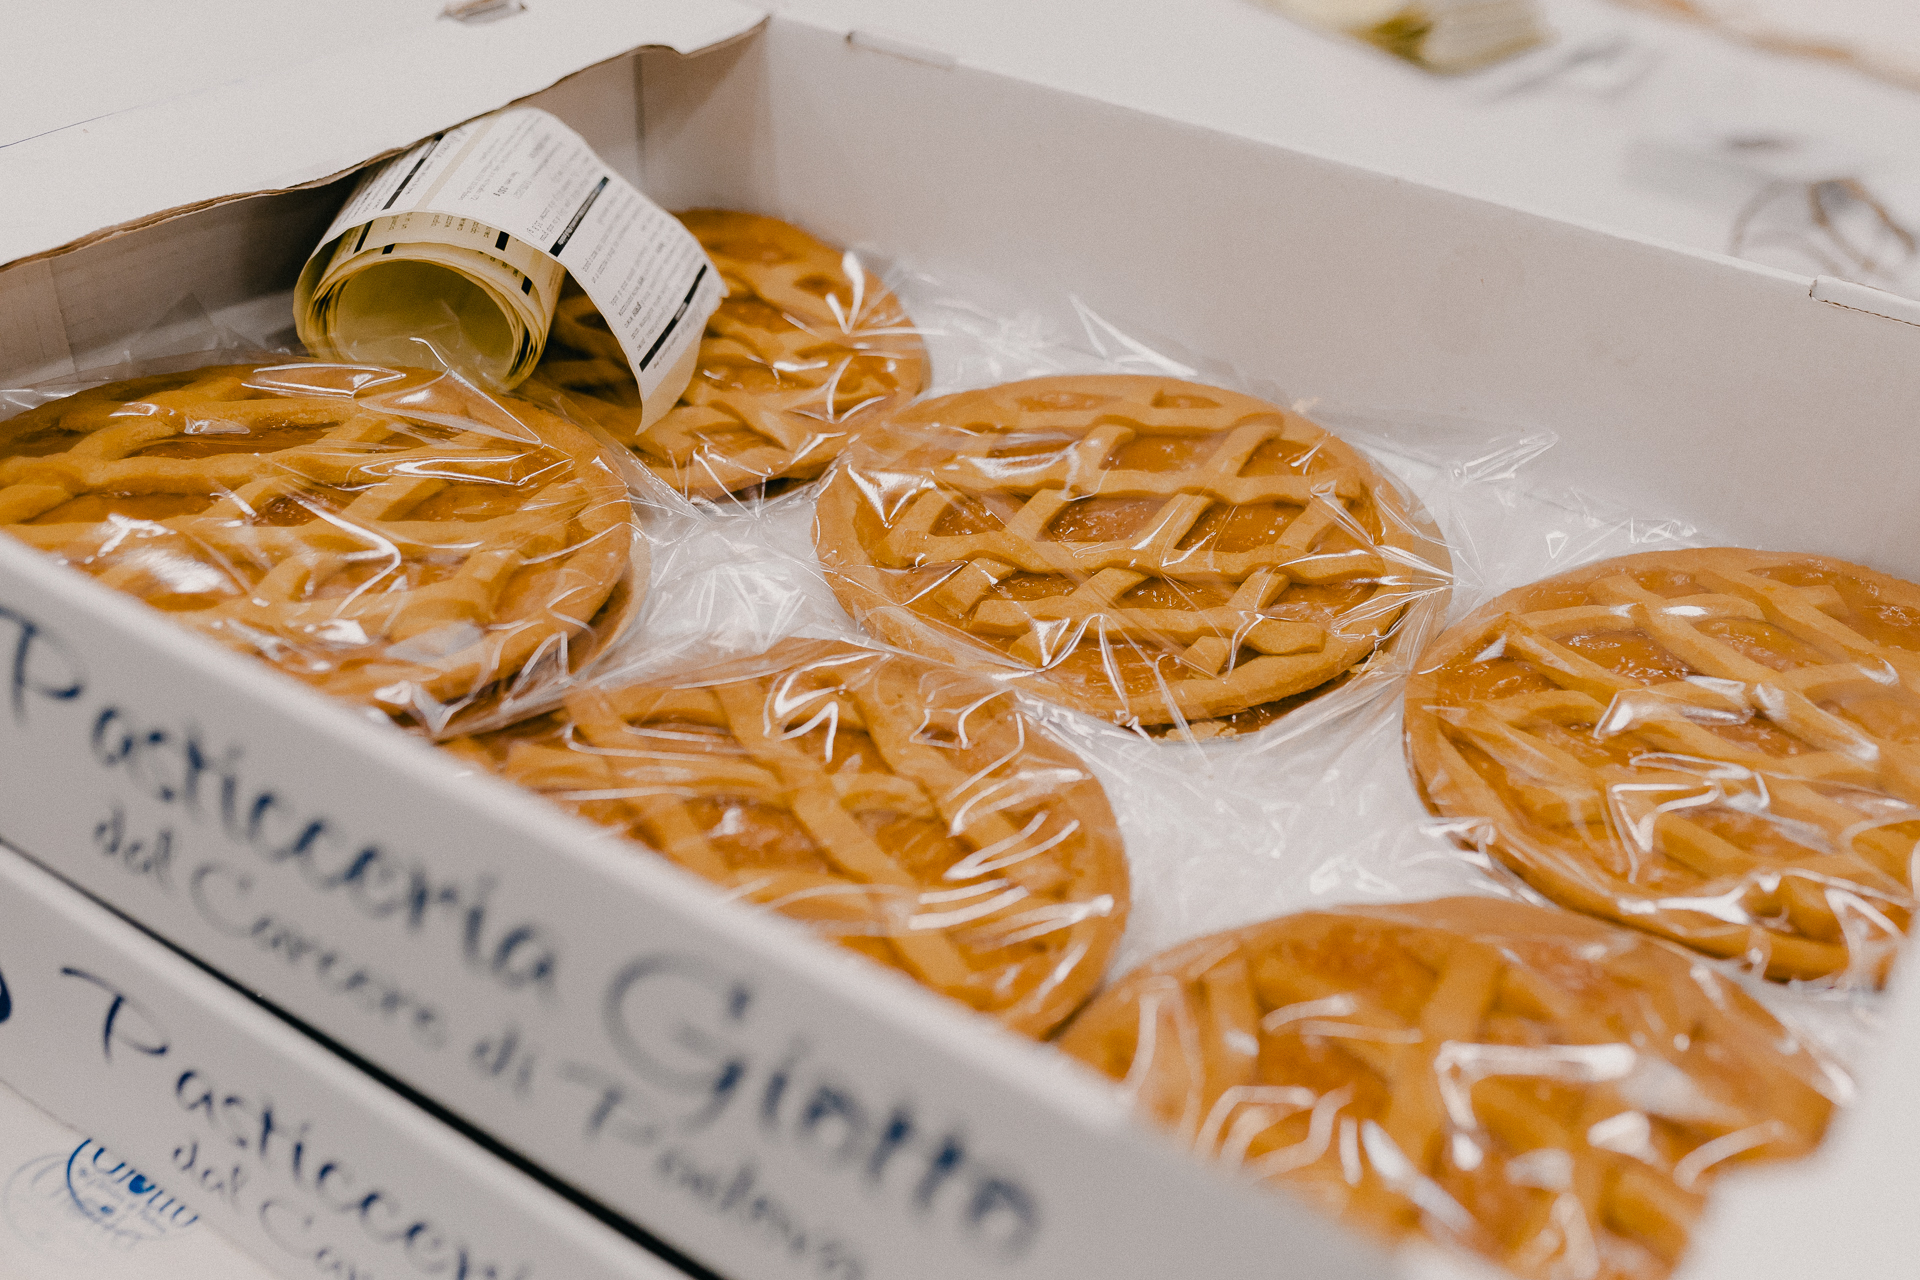 Giotto Bakery – Six crostata tarts filled with an orange-coloured jam, sitting in a box and covered with plastic foil.